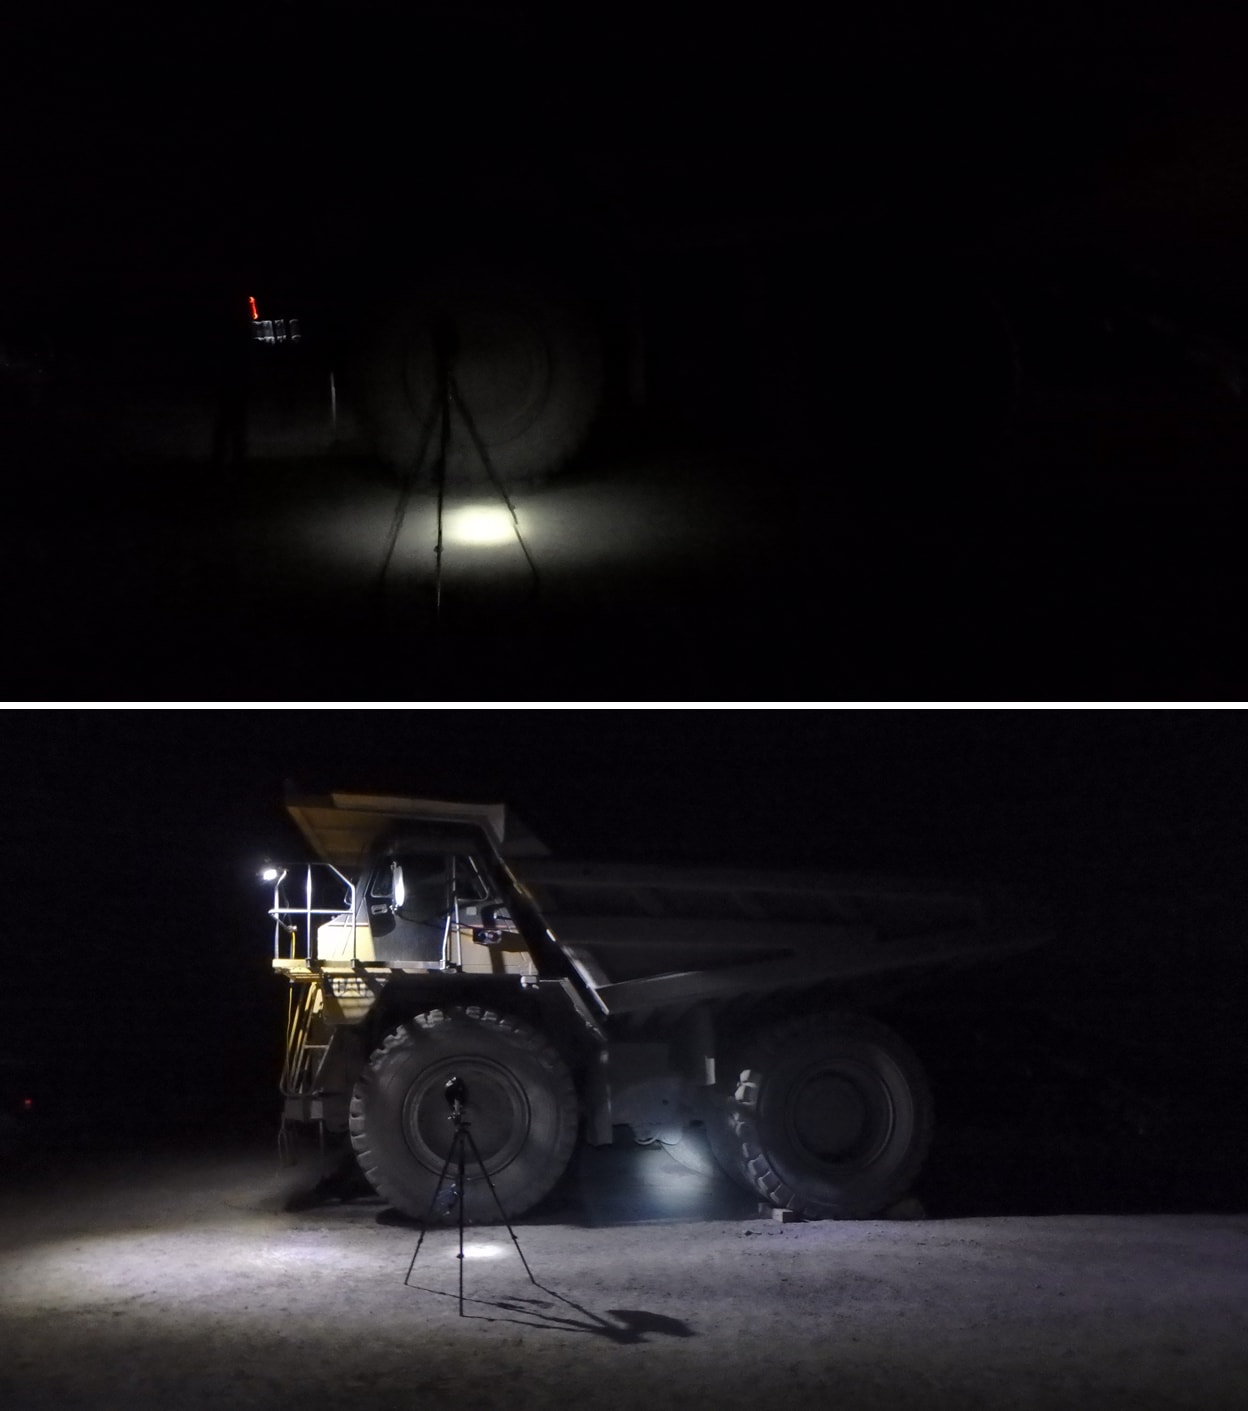 Image showing area near mobile equipment illuminated with only a headlamp and similar image showing area near mobile equipment illuminated with a headlamp and an area luminaire